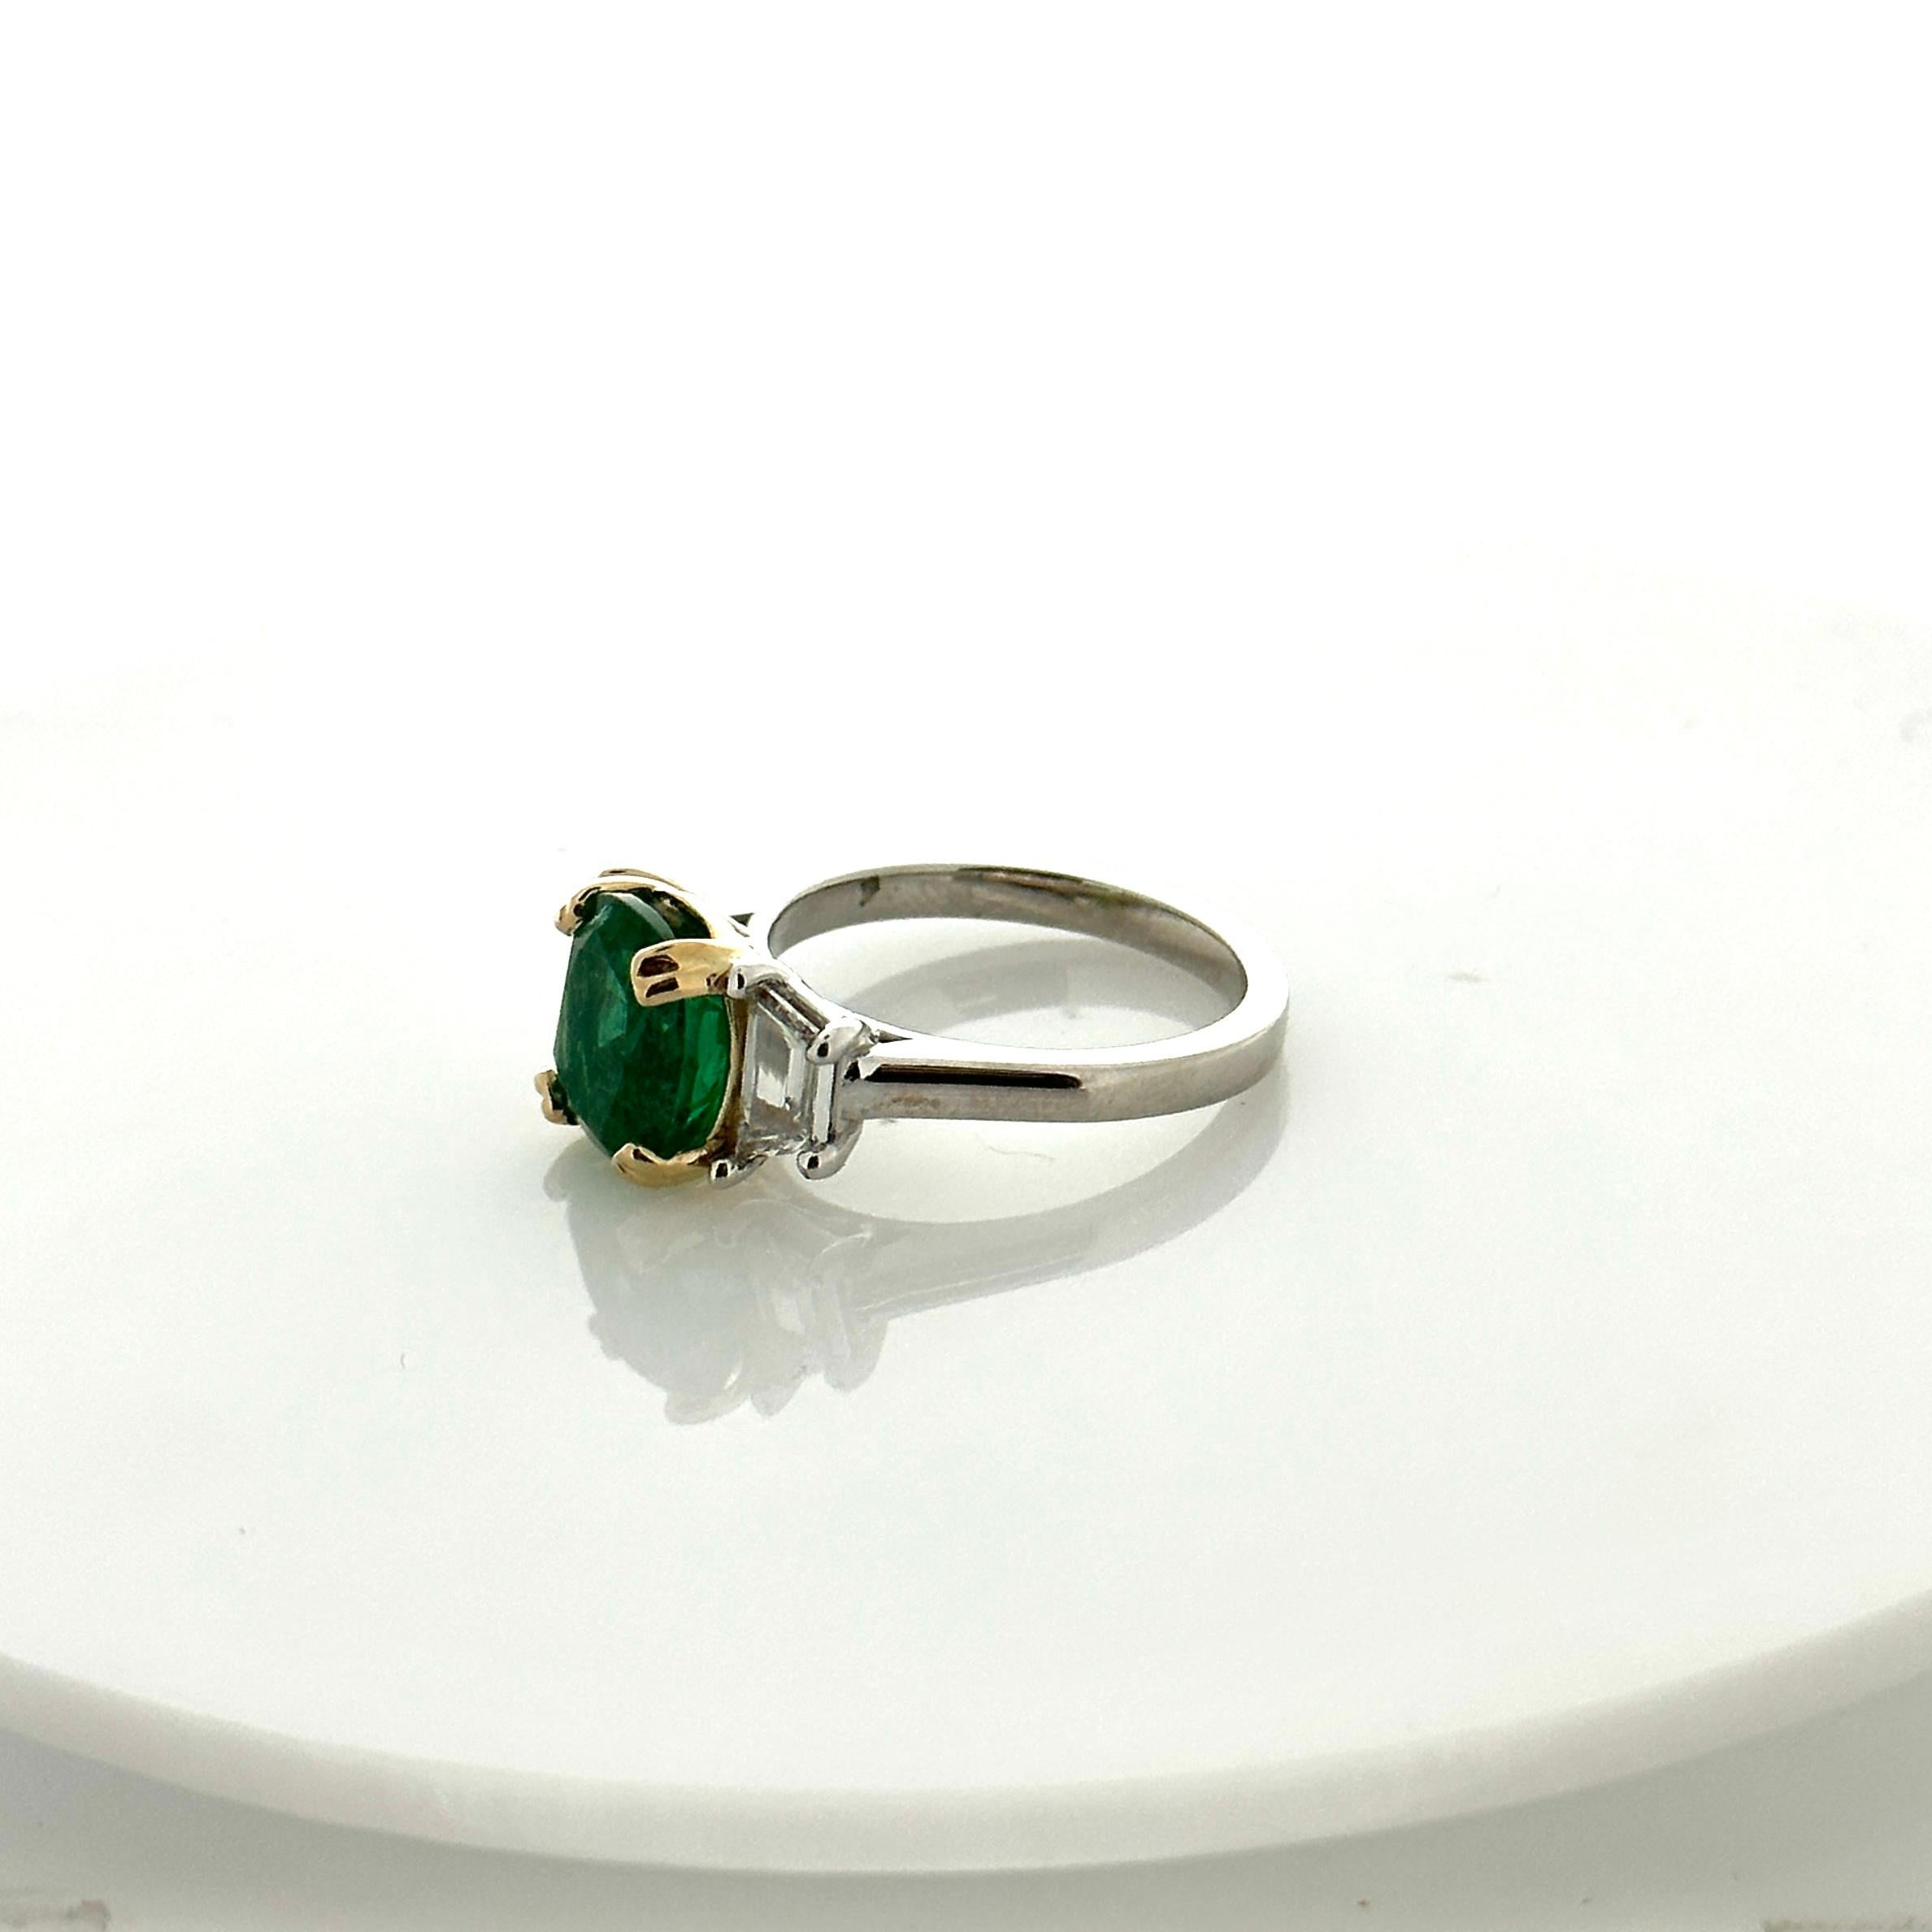 Would you look at this beauty! Simple in design, but there is nothing ordinary about the gorgeous color of this breathtaking green emerald ring. This stunning piece features a emerald cut 2.97 carats emerald, set into a four-prong. It is accompanied